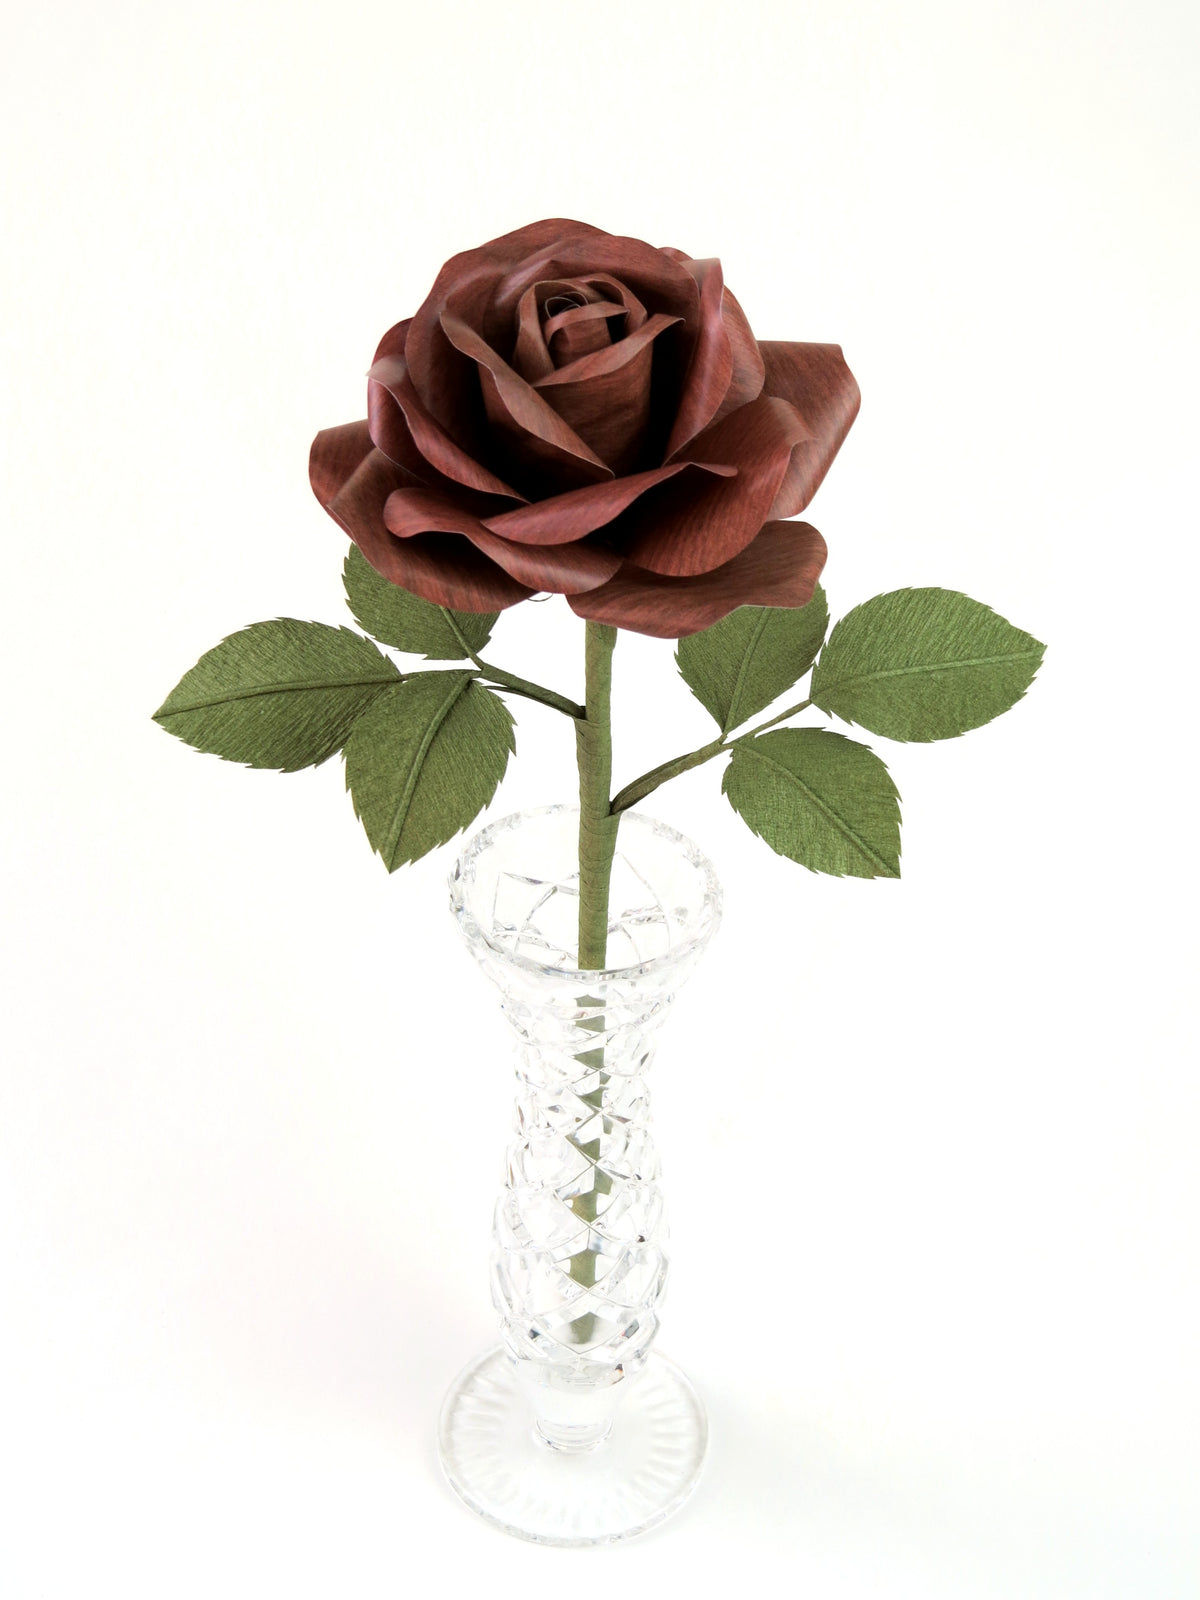 Dark wood grain paper rose with six green leaves standing in a narrow glass vase set against a white background